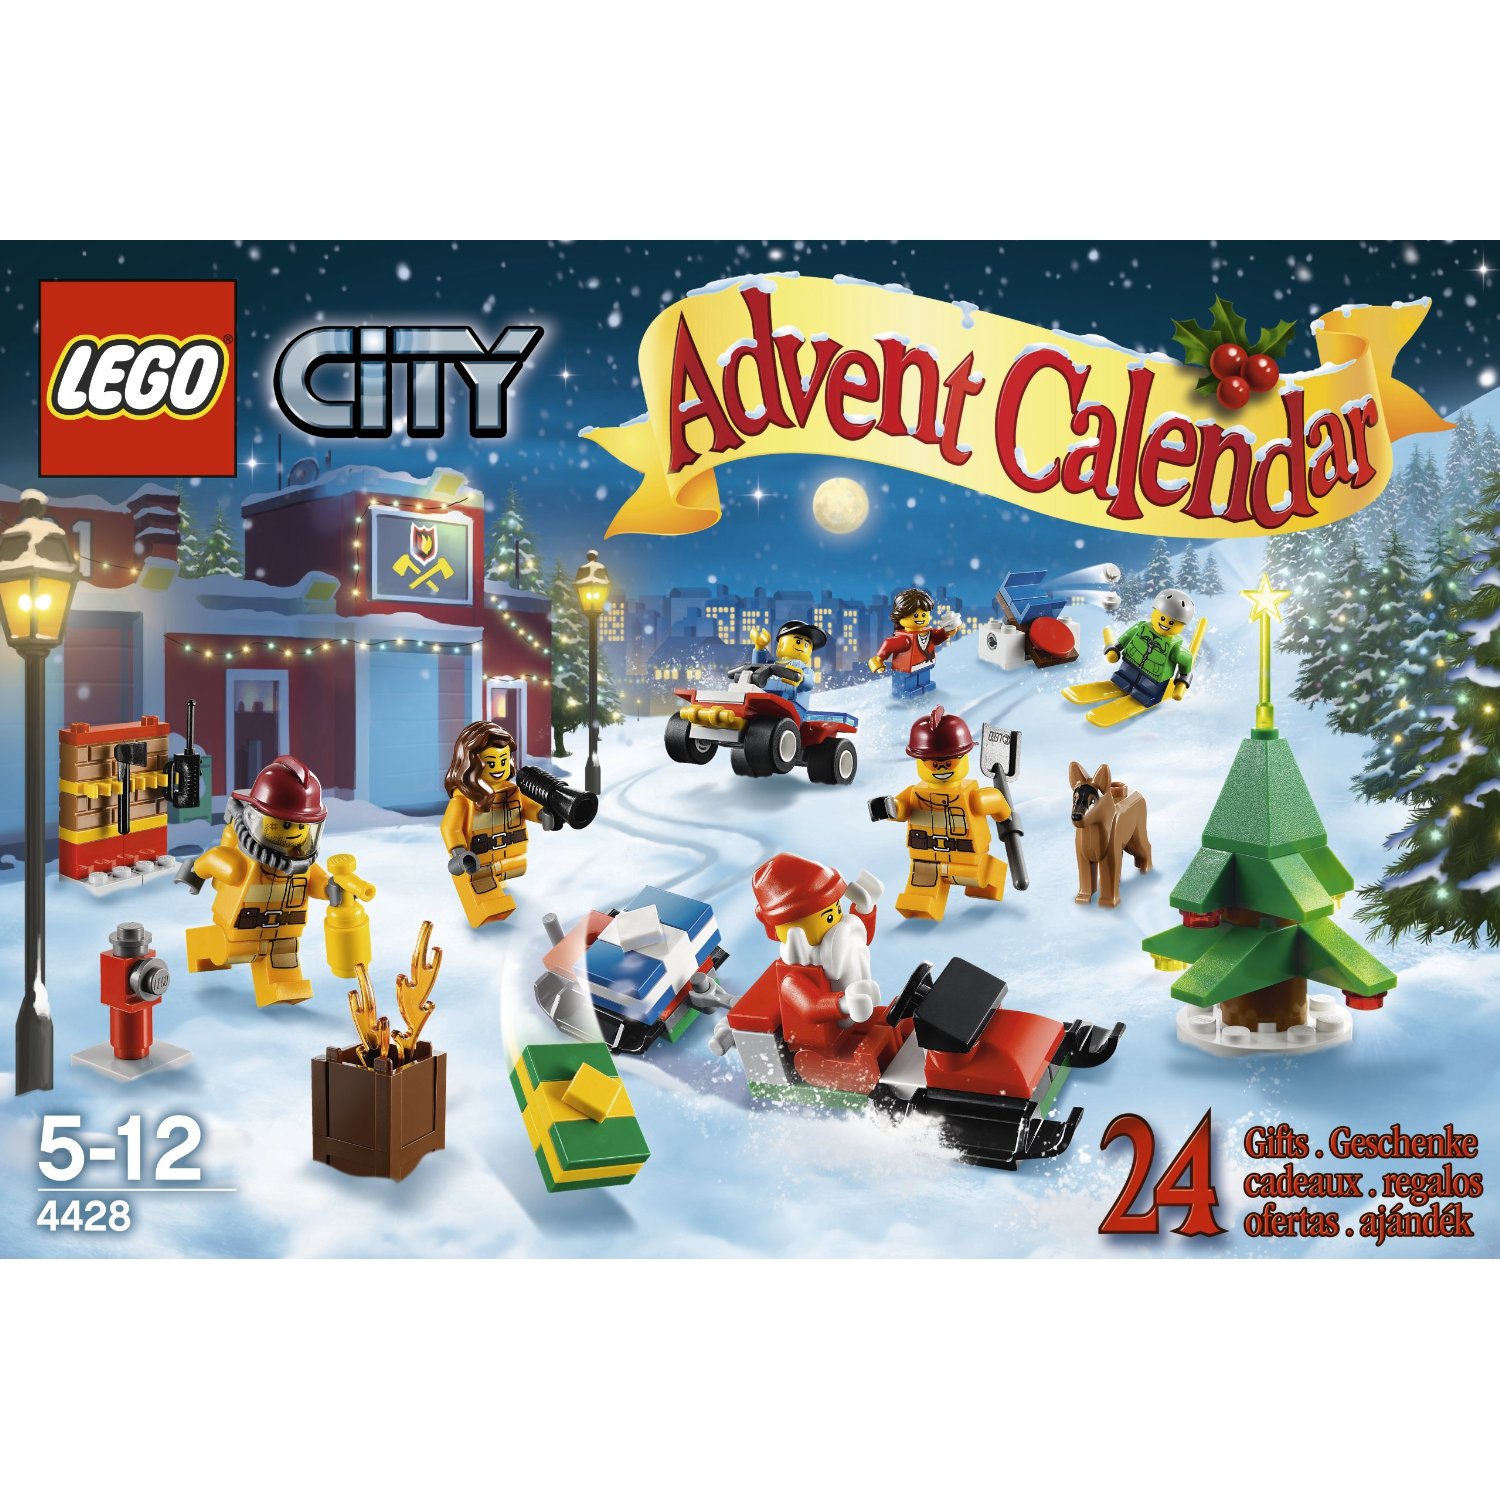 Amazon *HOT* price for the LEGO Advent Calendar….down to only 29.97